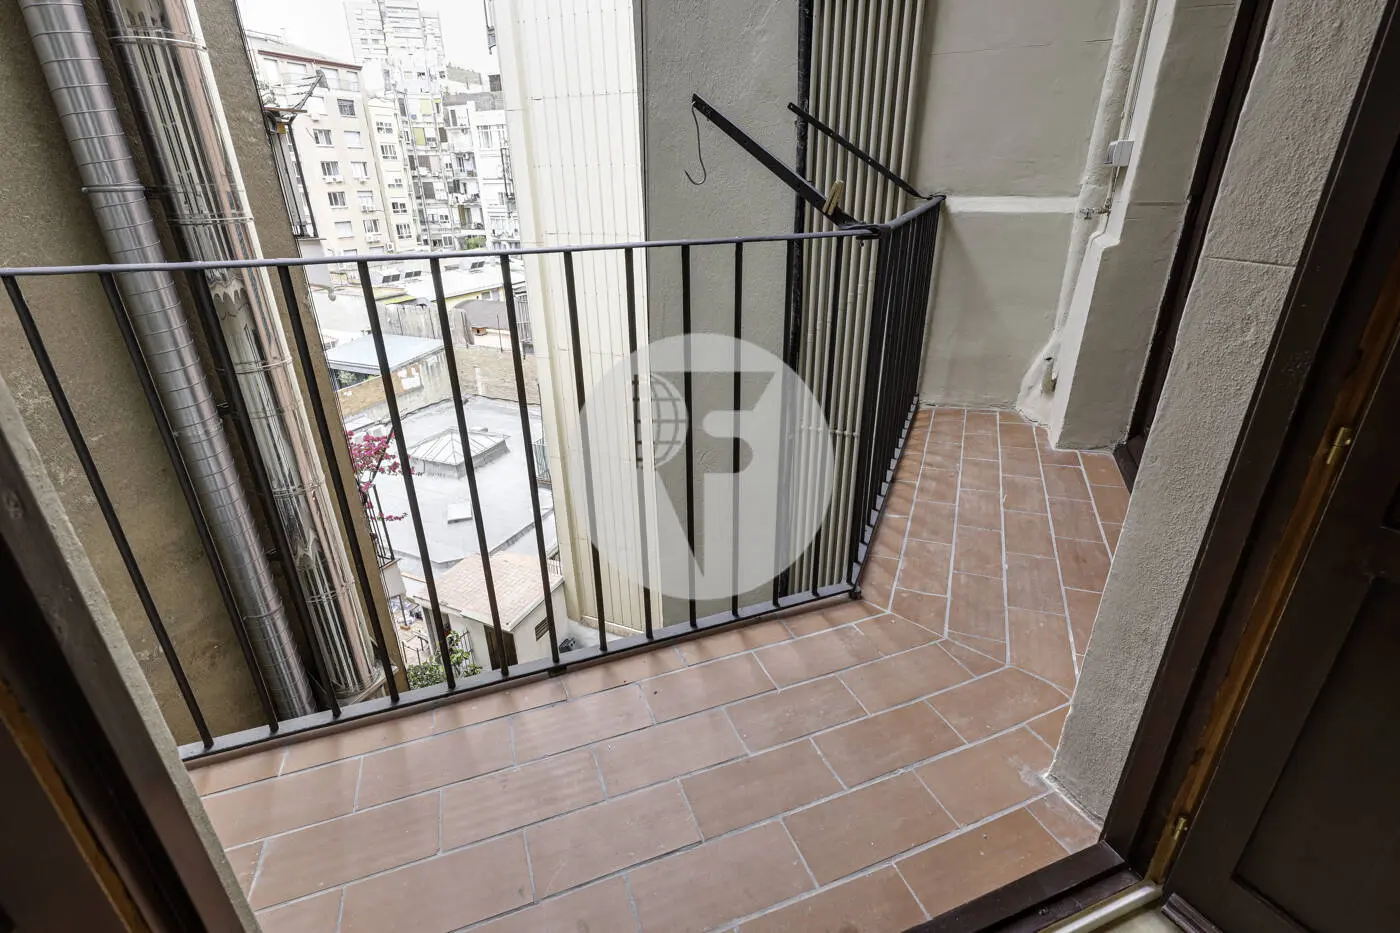 Magnificent brand new apartment in a rehabilitated royal estate in L'Antiga Esquerra de l'Eixample in Barcelona, one of the most emblematic areas of Barcelona. 22